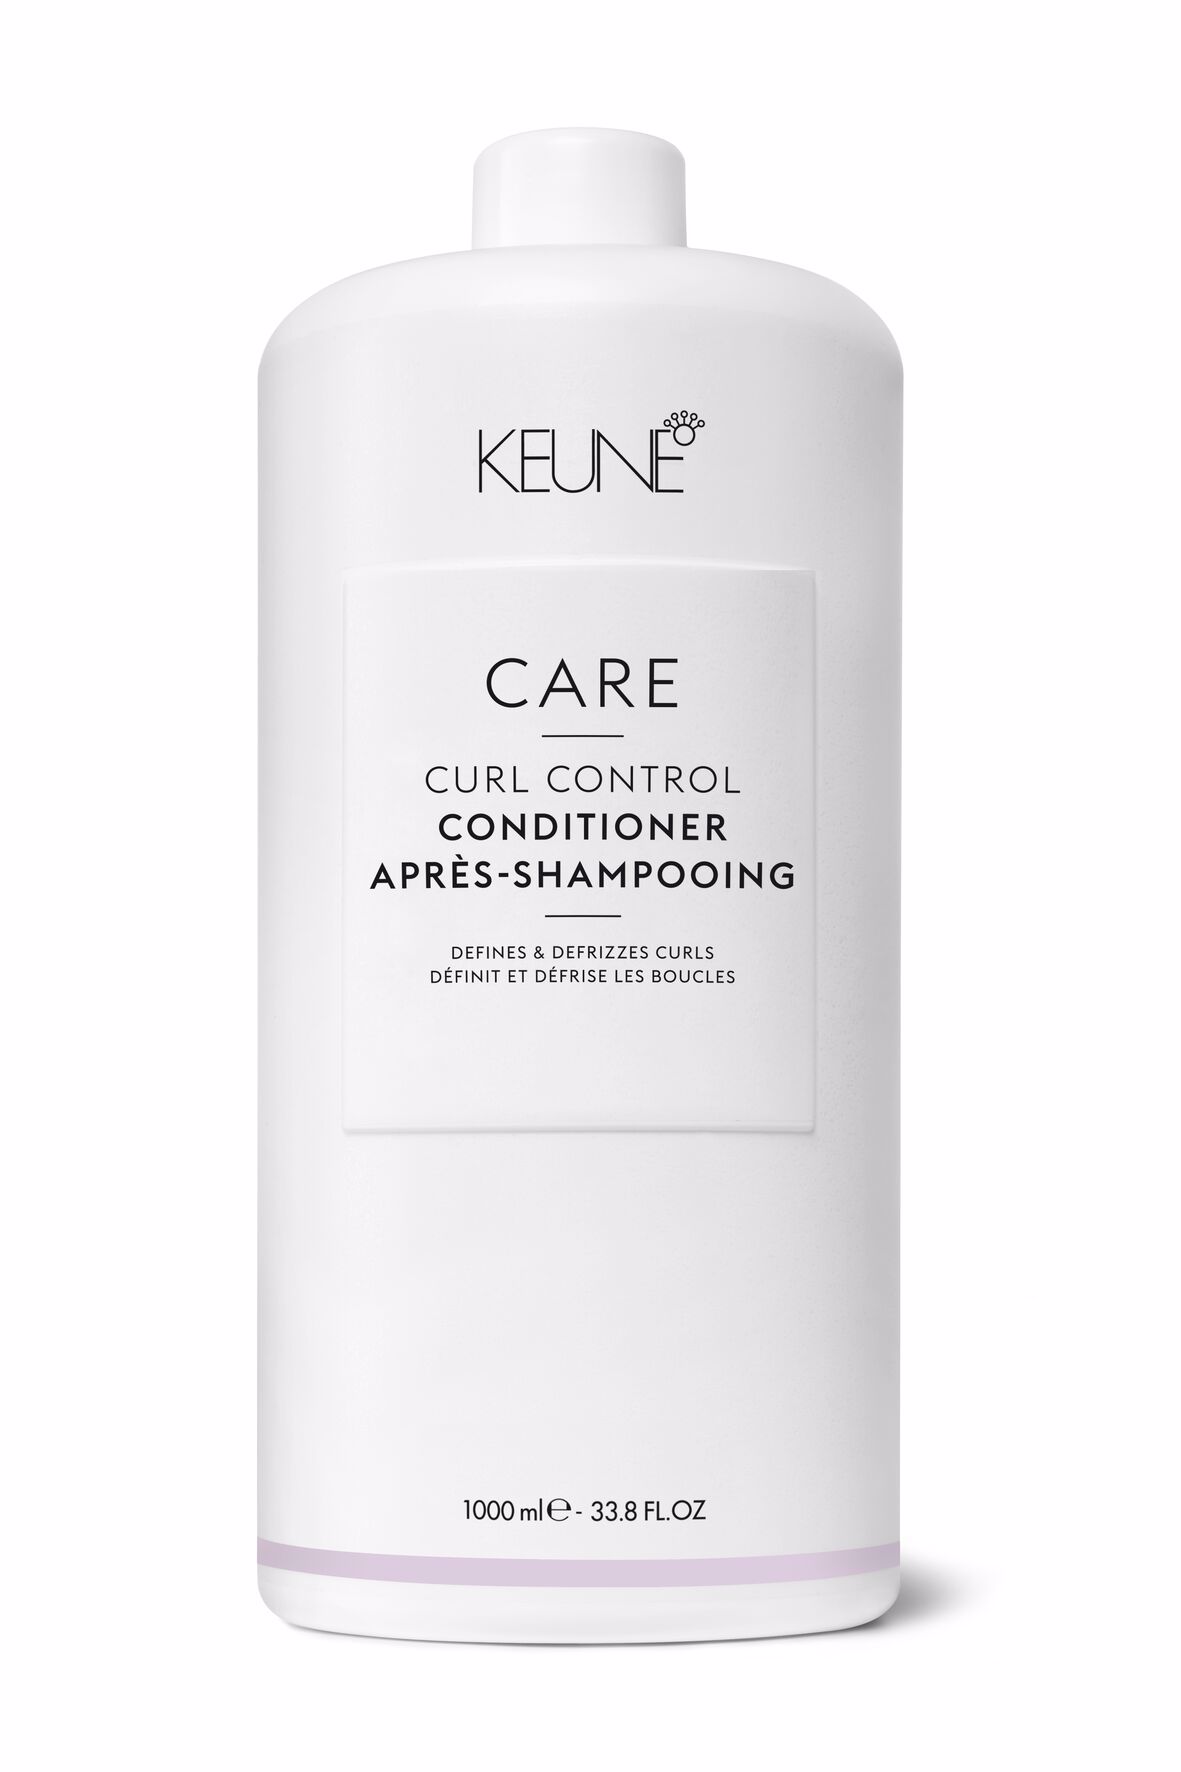 Frizz-free, beautiful curls with Care Curl Control Conditioner. This hair product provides deep hydration, frizz protection, and optimal hair structure for your hairstyling. On keune.ch.